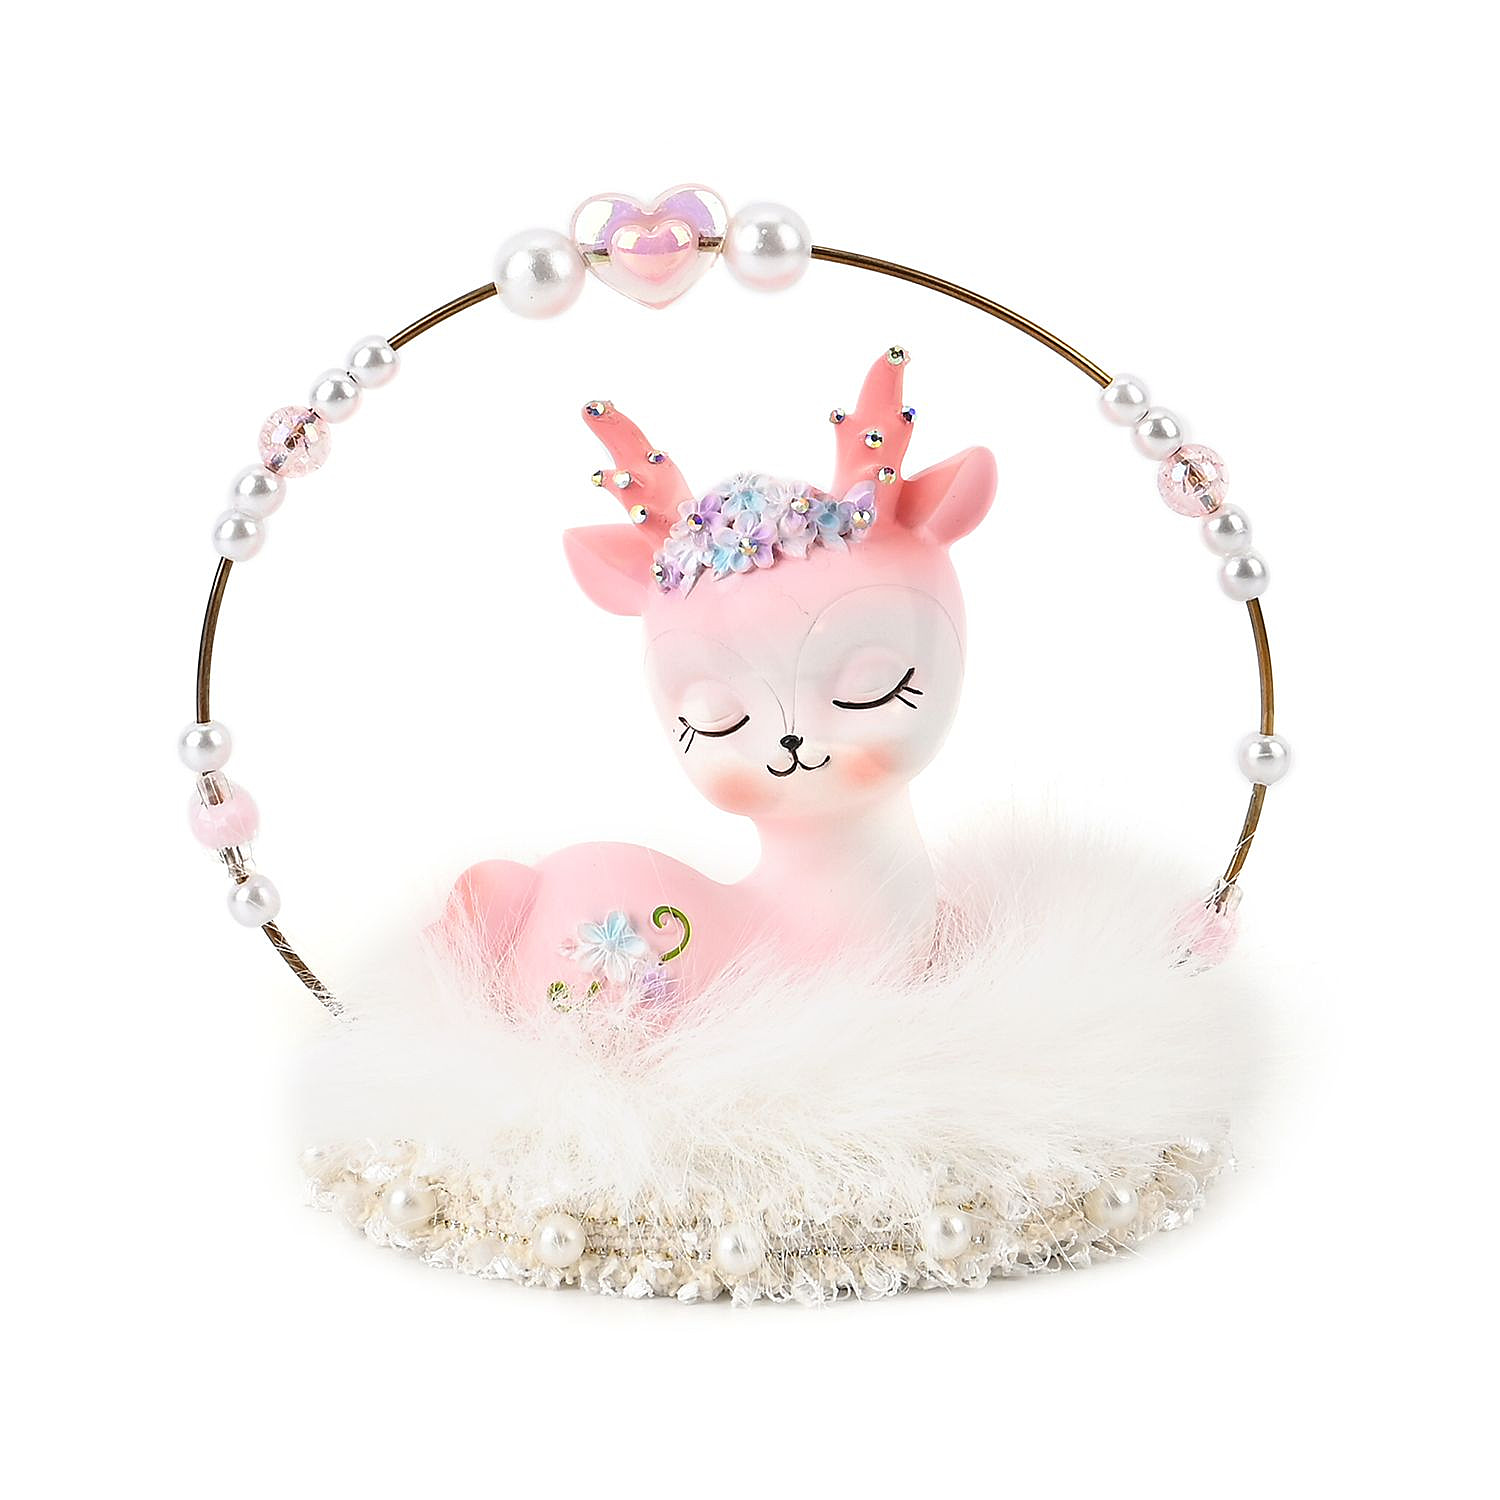 Aesthetic Sleeping Deer Tabletop Decoration (Size 12x12x10 cm) - Pink & White